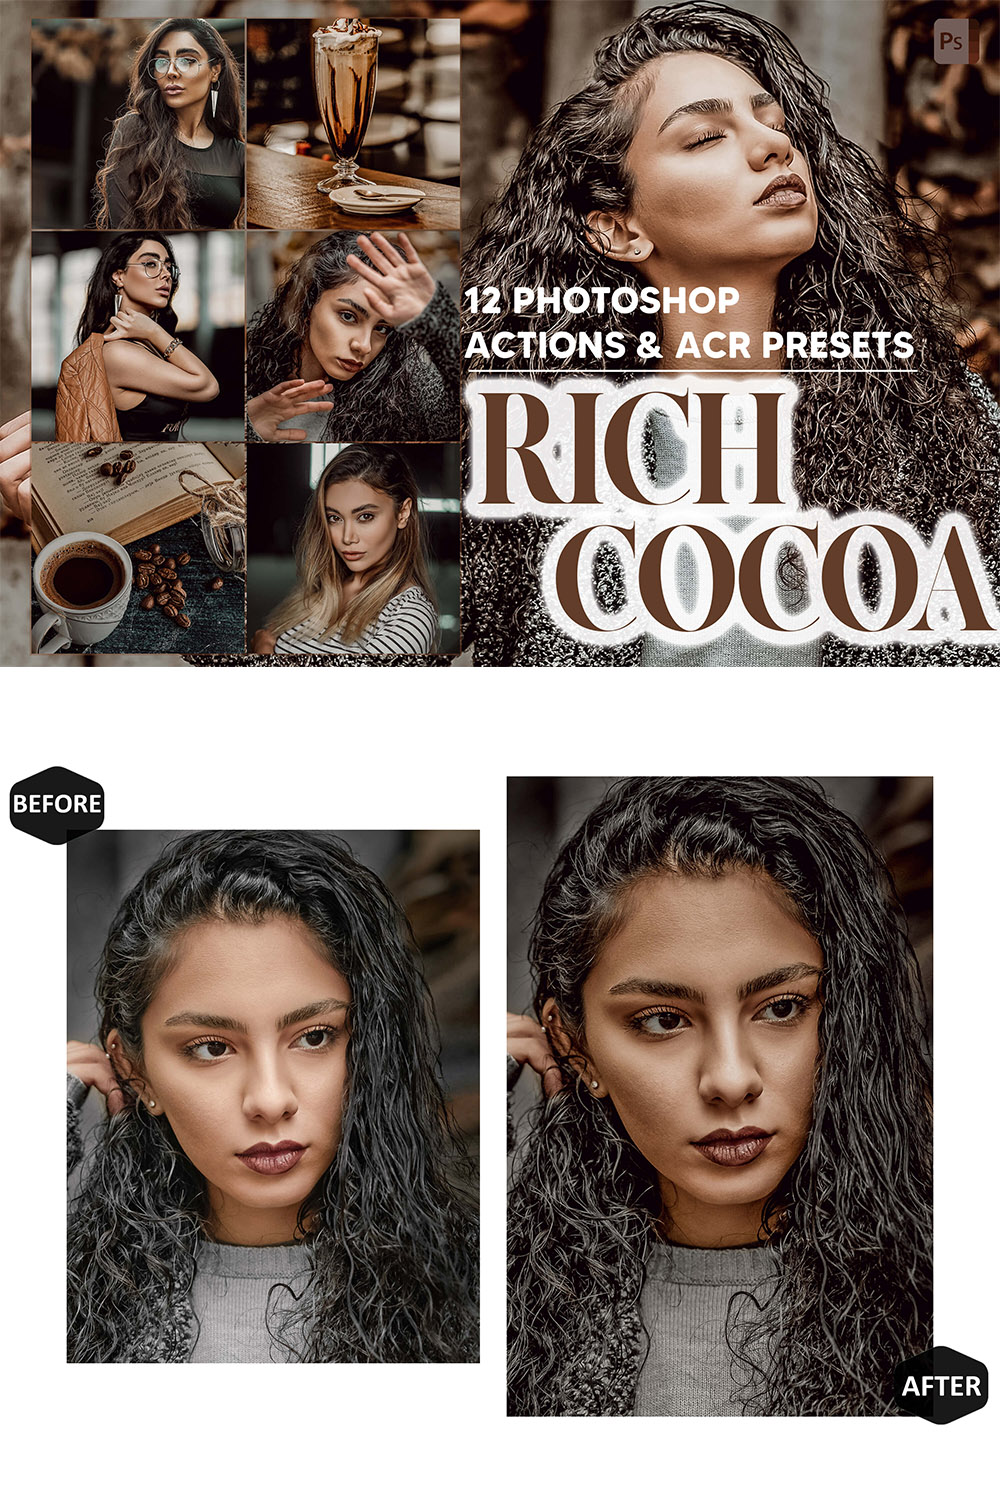 12 Photoshop Actions, Rich Cocoa Ps Action, Brown ACR Preset, Hot Coffee Ps Filter, Atn Portrait And Lifestyle Theme For Instagram, Blogger pinterest preview image.